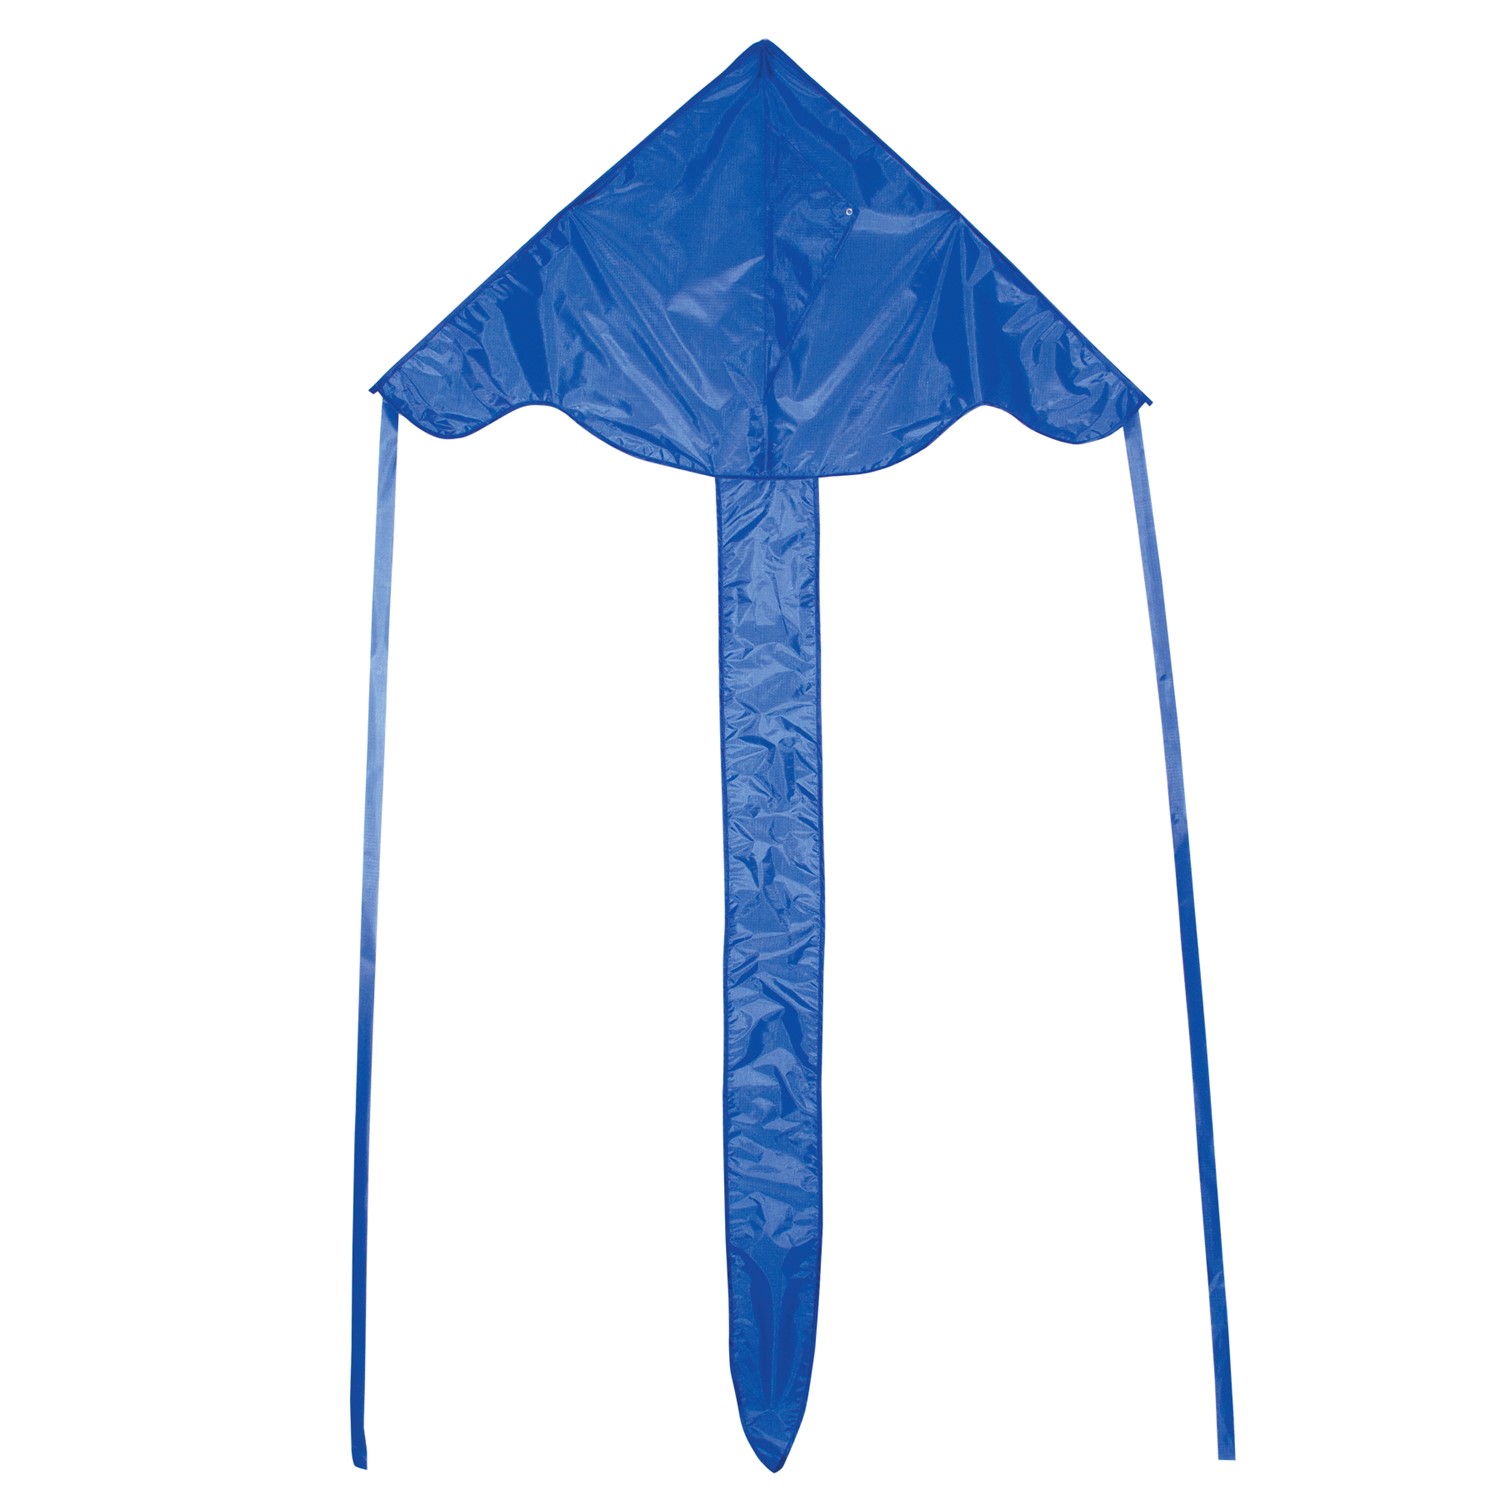 In the Breeze Blue Colorfly 43" Fly-Hi Kite 3212